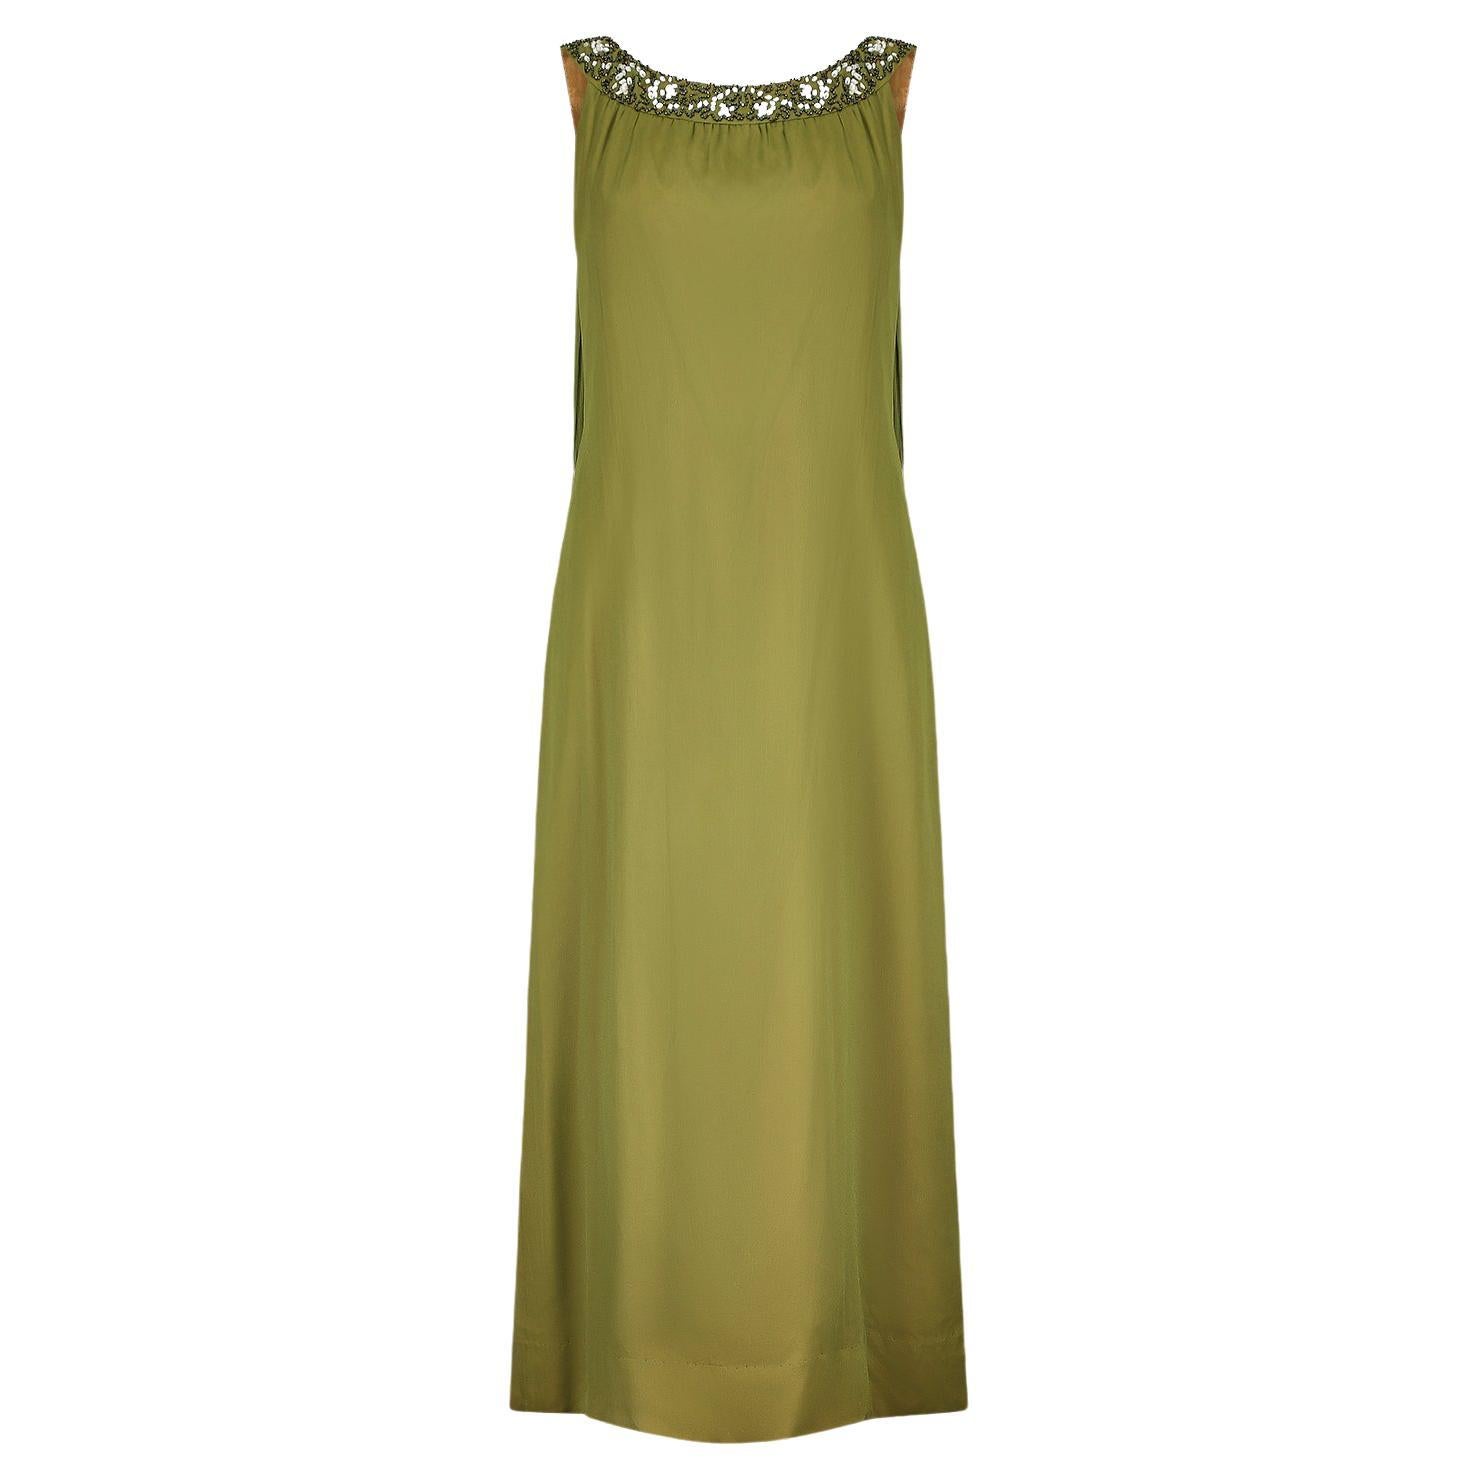 1960s California Olive Green Chiffon Beaded Dress with Train For Sale